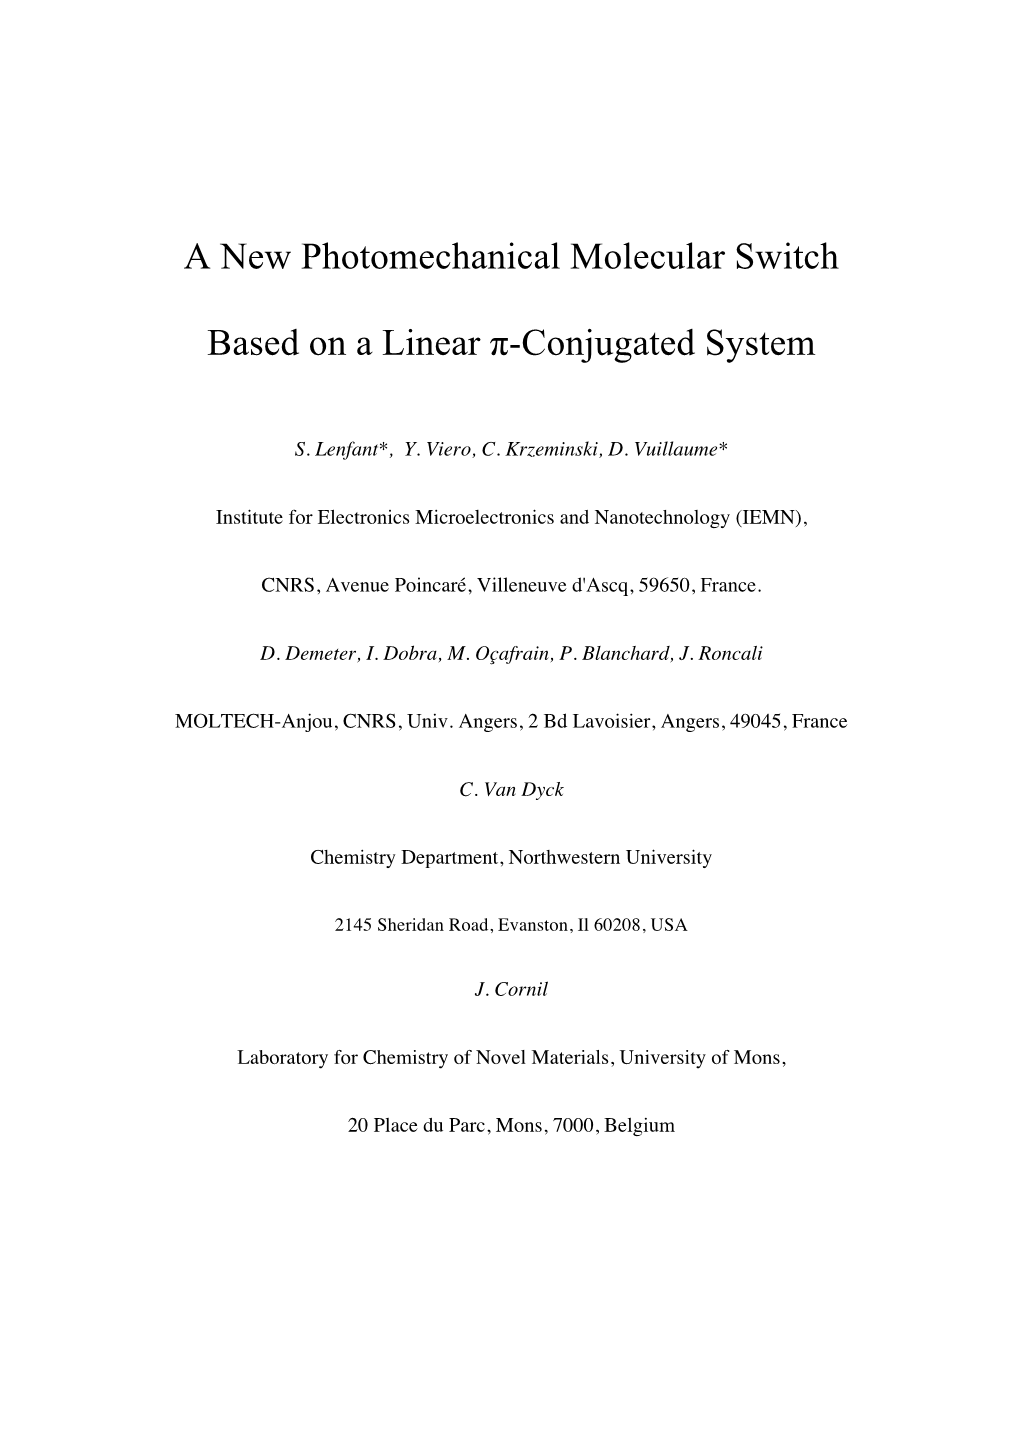 A New Photomechanical Molecular Switch Based on a Linear Π-Conjugated System